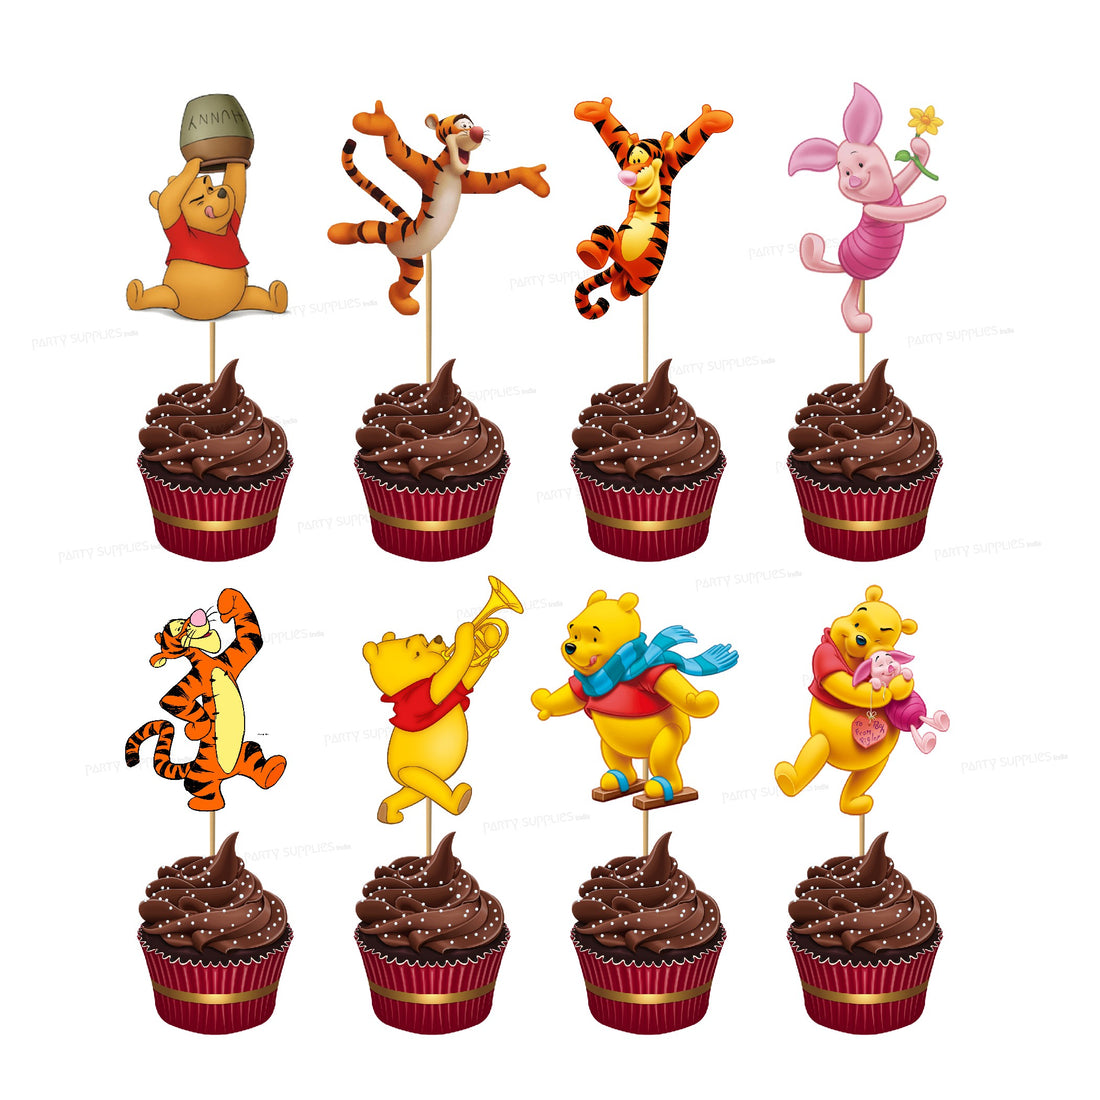 PSI Winnie the Pooh Theme Cup Cake Topper